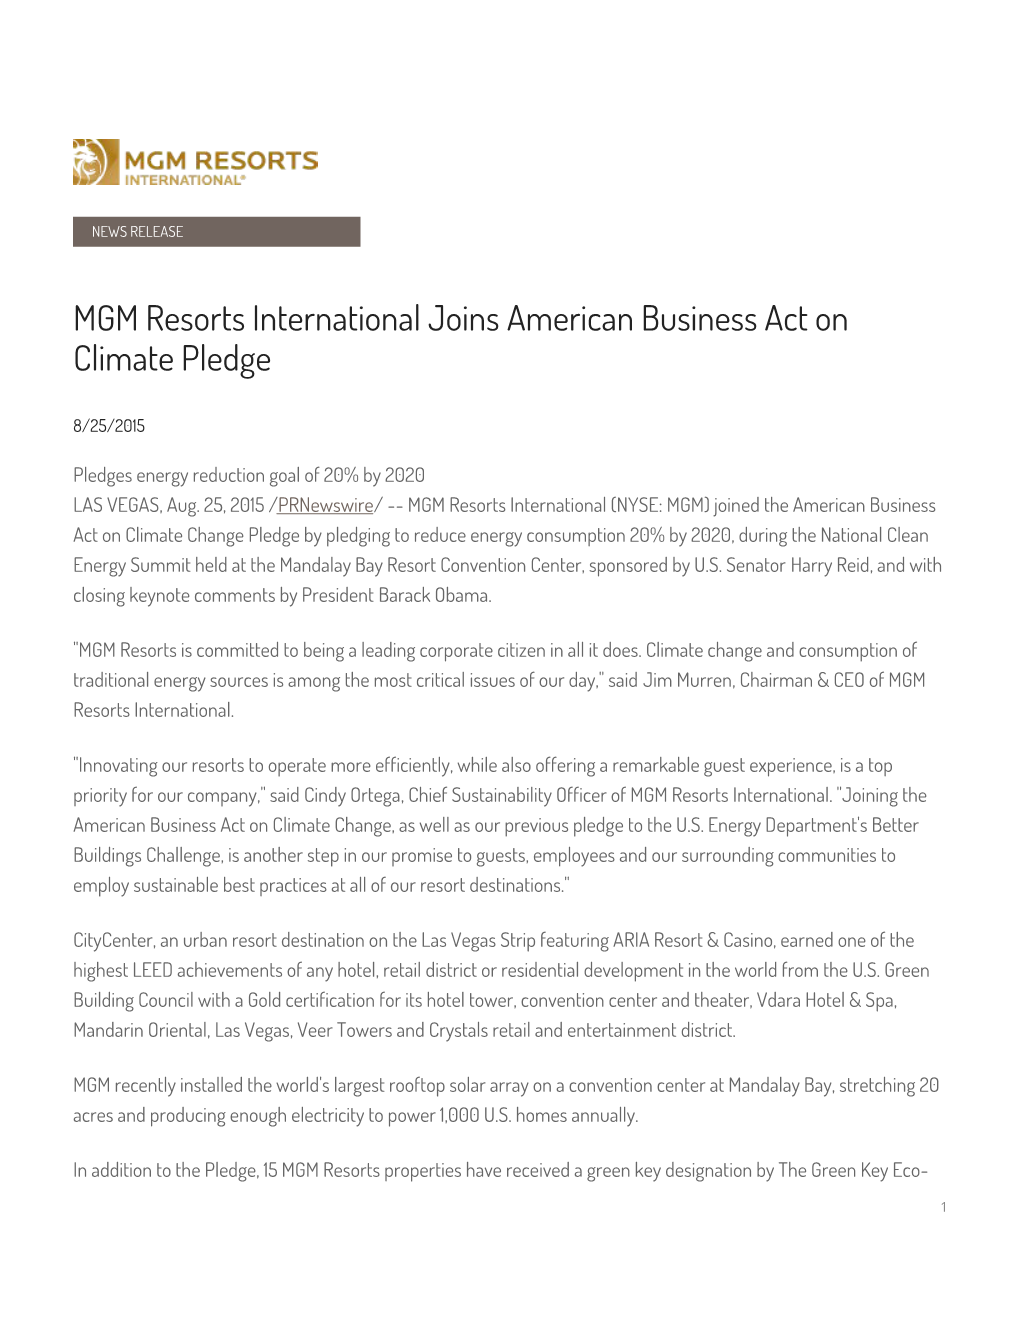 MGM Resorts International Joins American Business Act on Climate Pledge